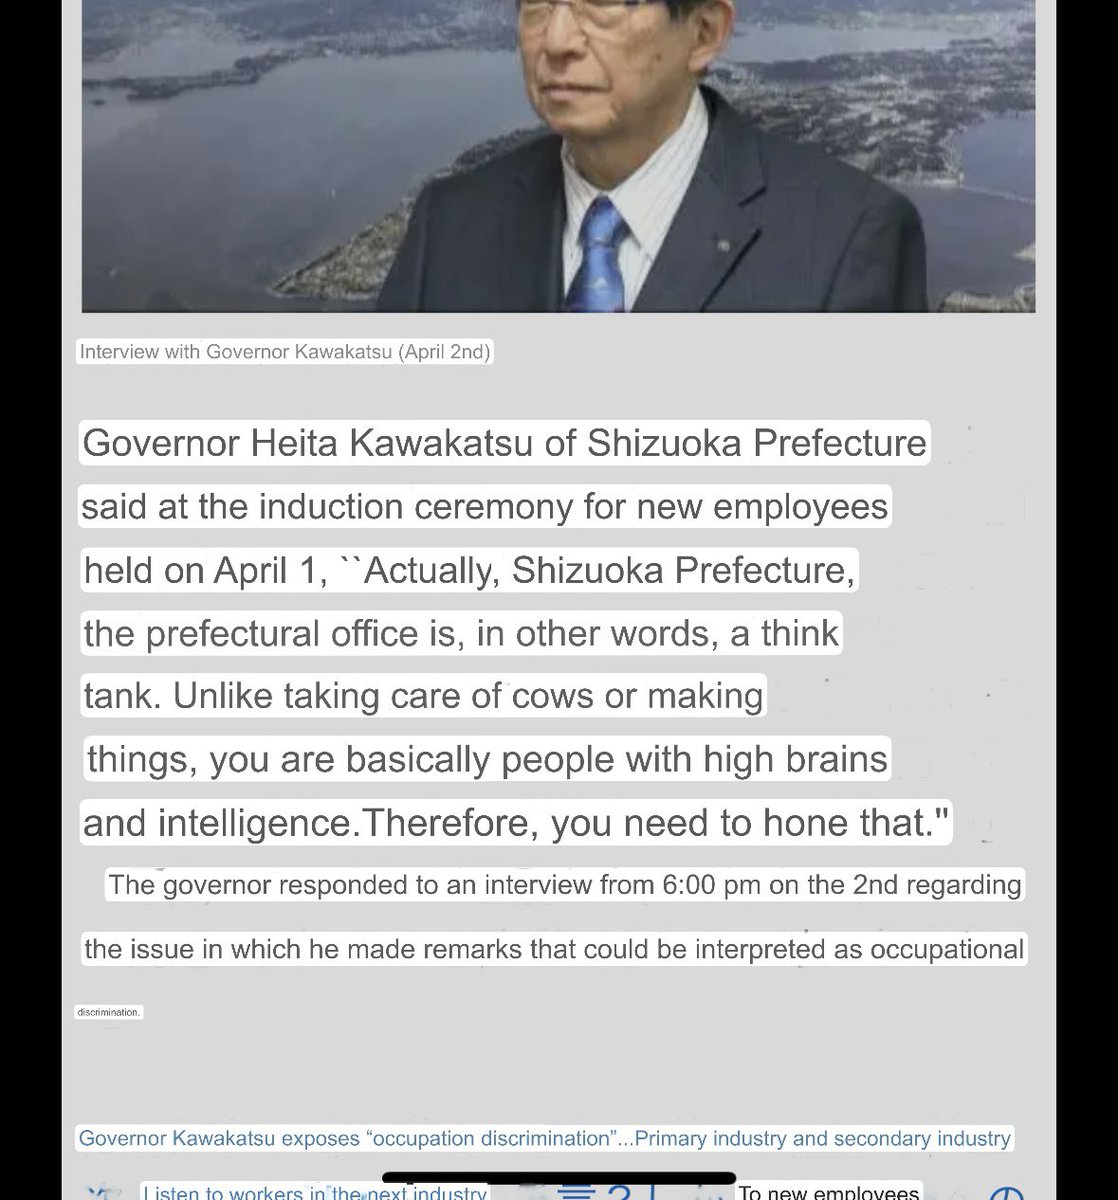 The governor of Shizuoka Prefecture is a person who discriminates by occupation
#BBC #ABC #AFP #AssociatedPress